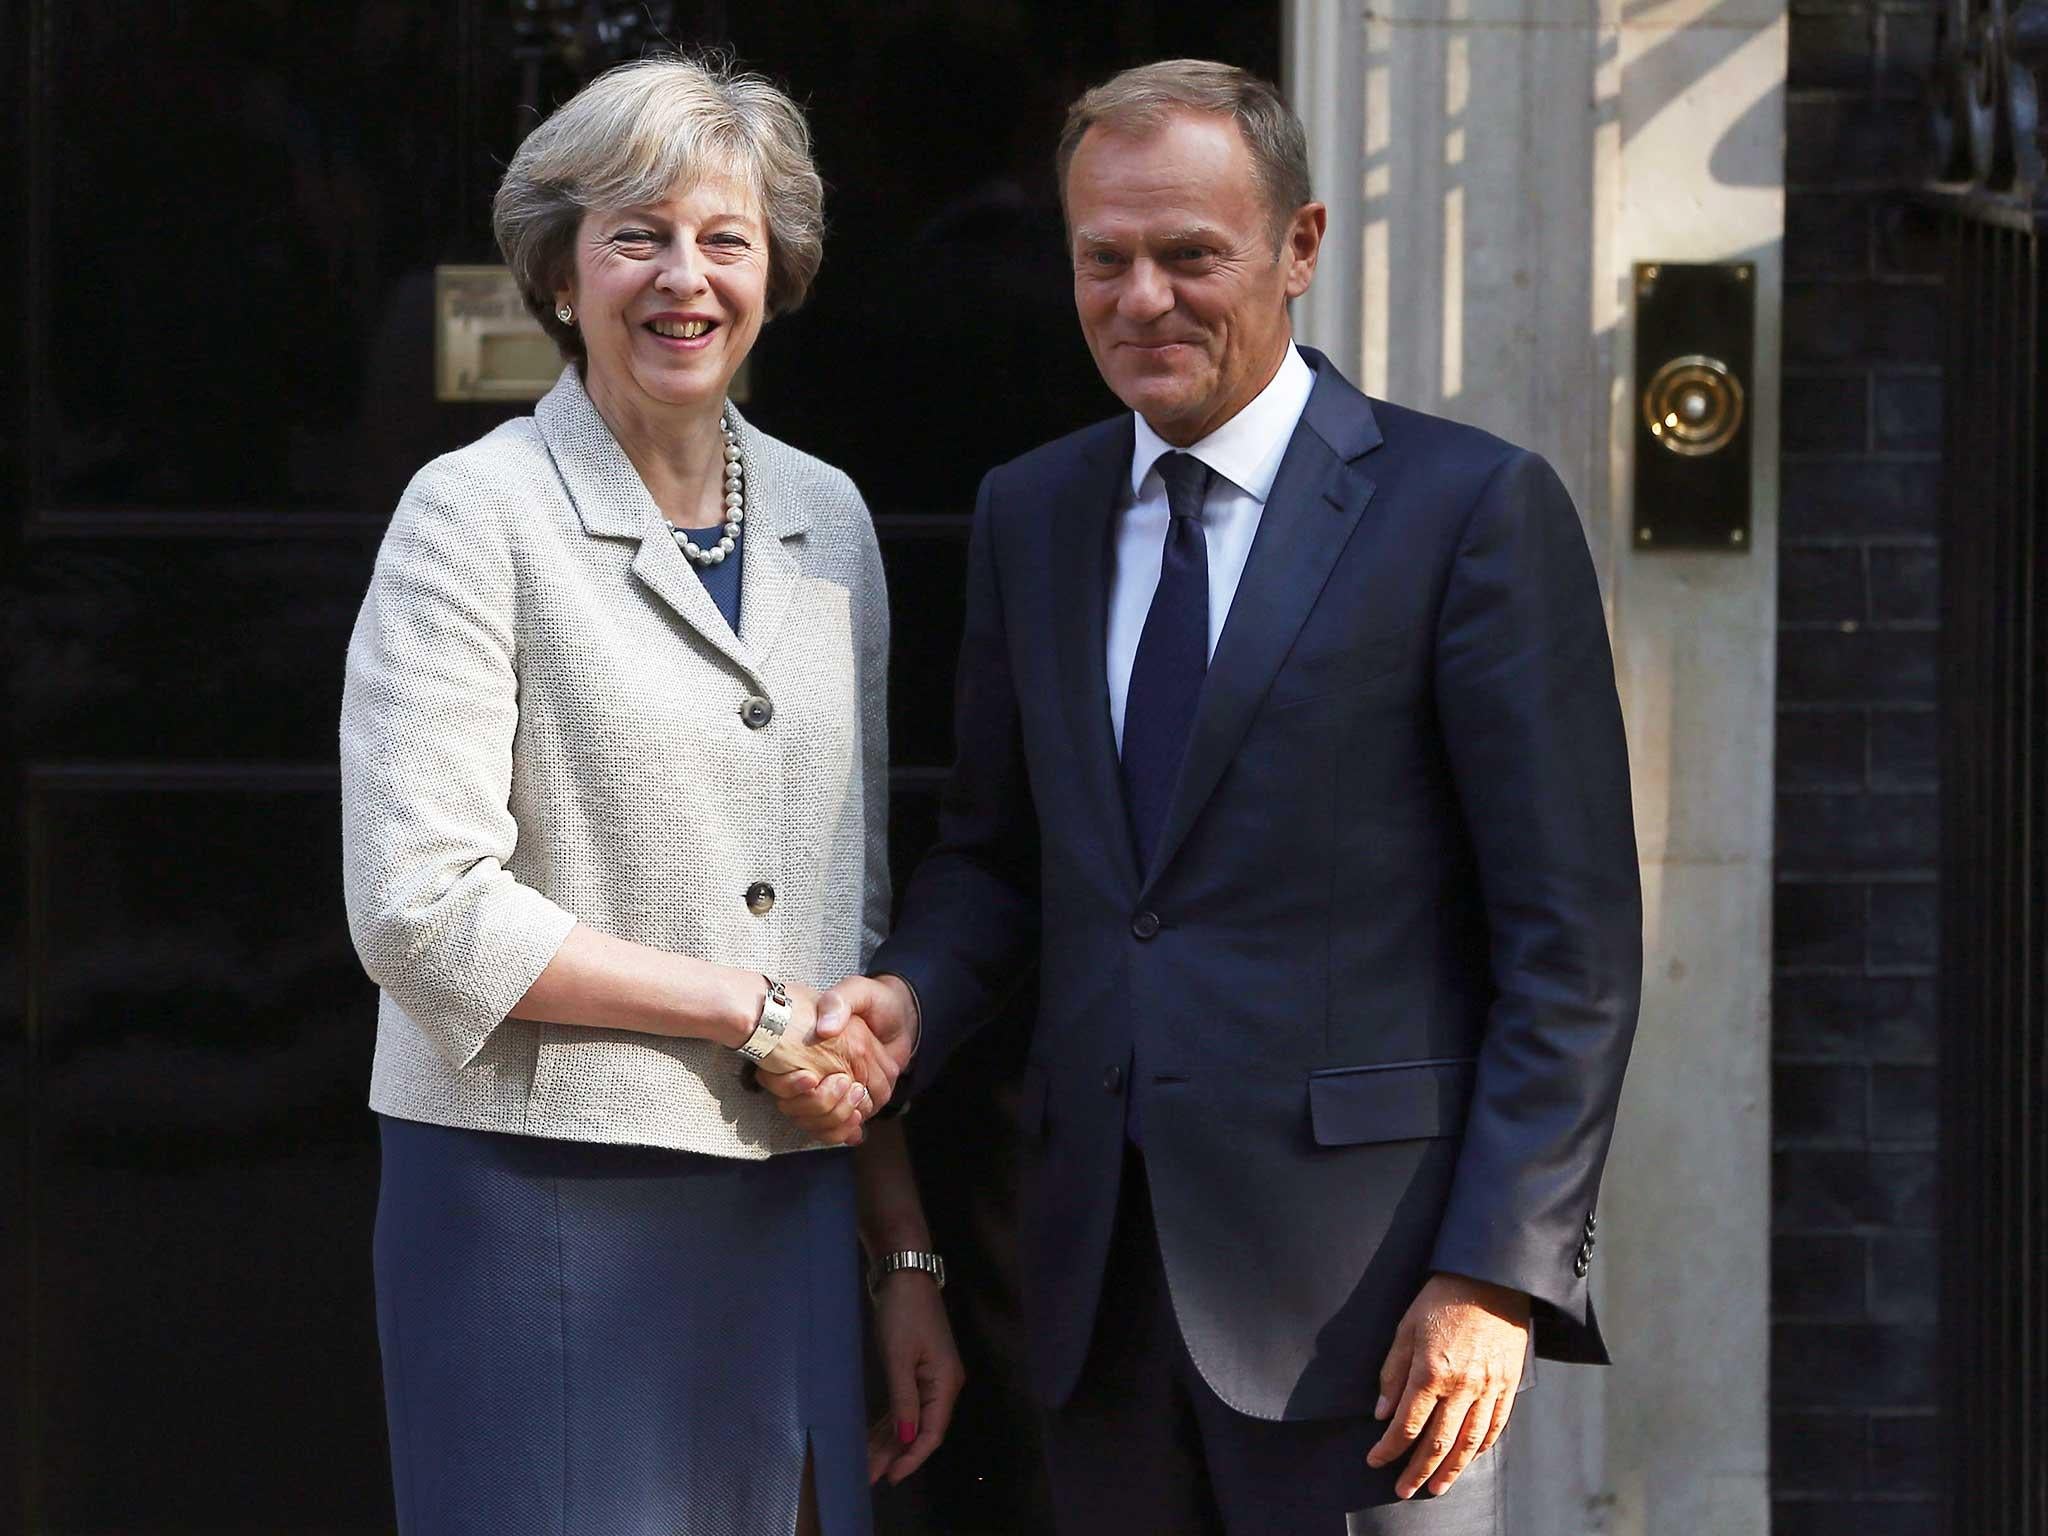 The letter from Theresa May to Donald Tusk this week will have profound consequences for our relationship with the continent